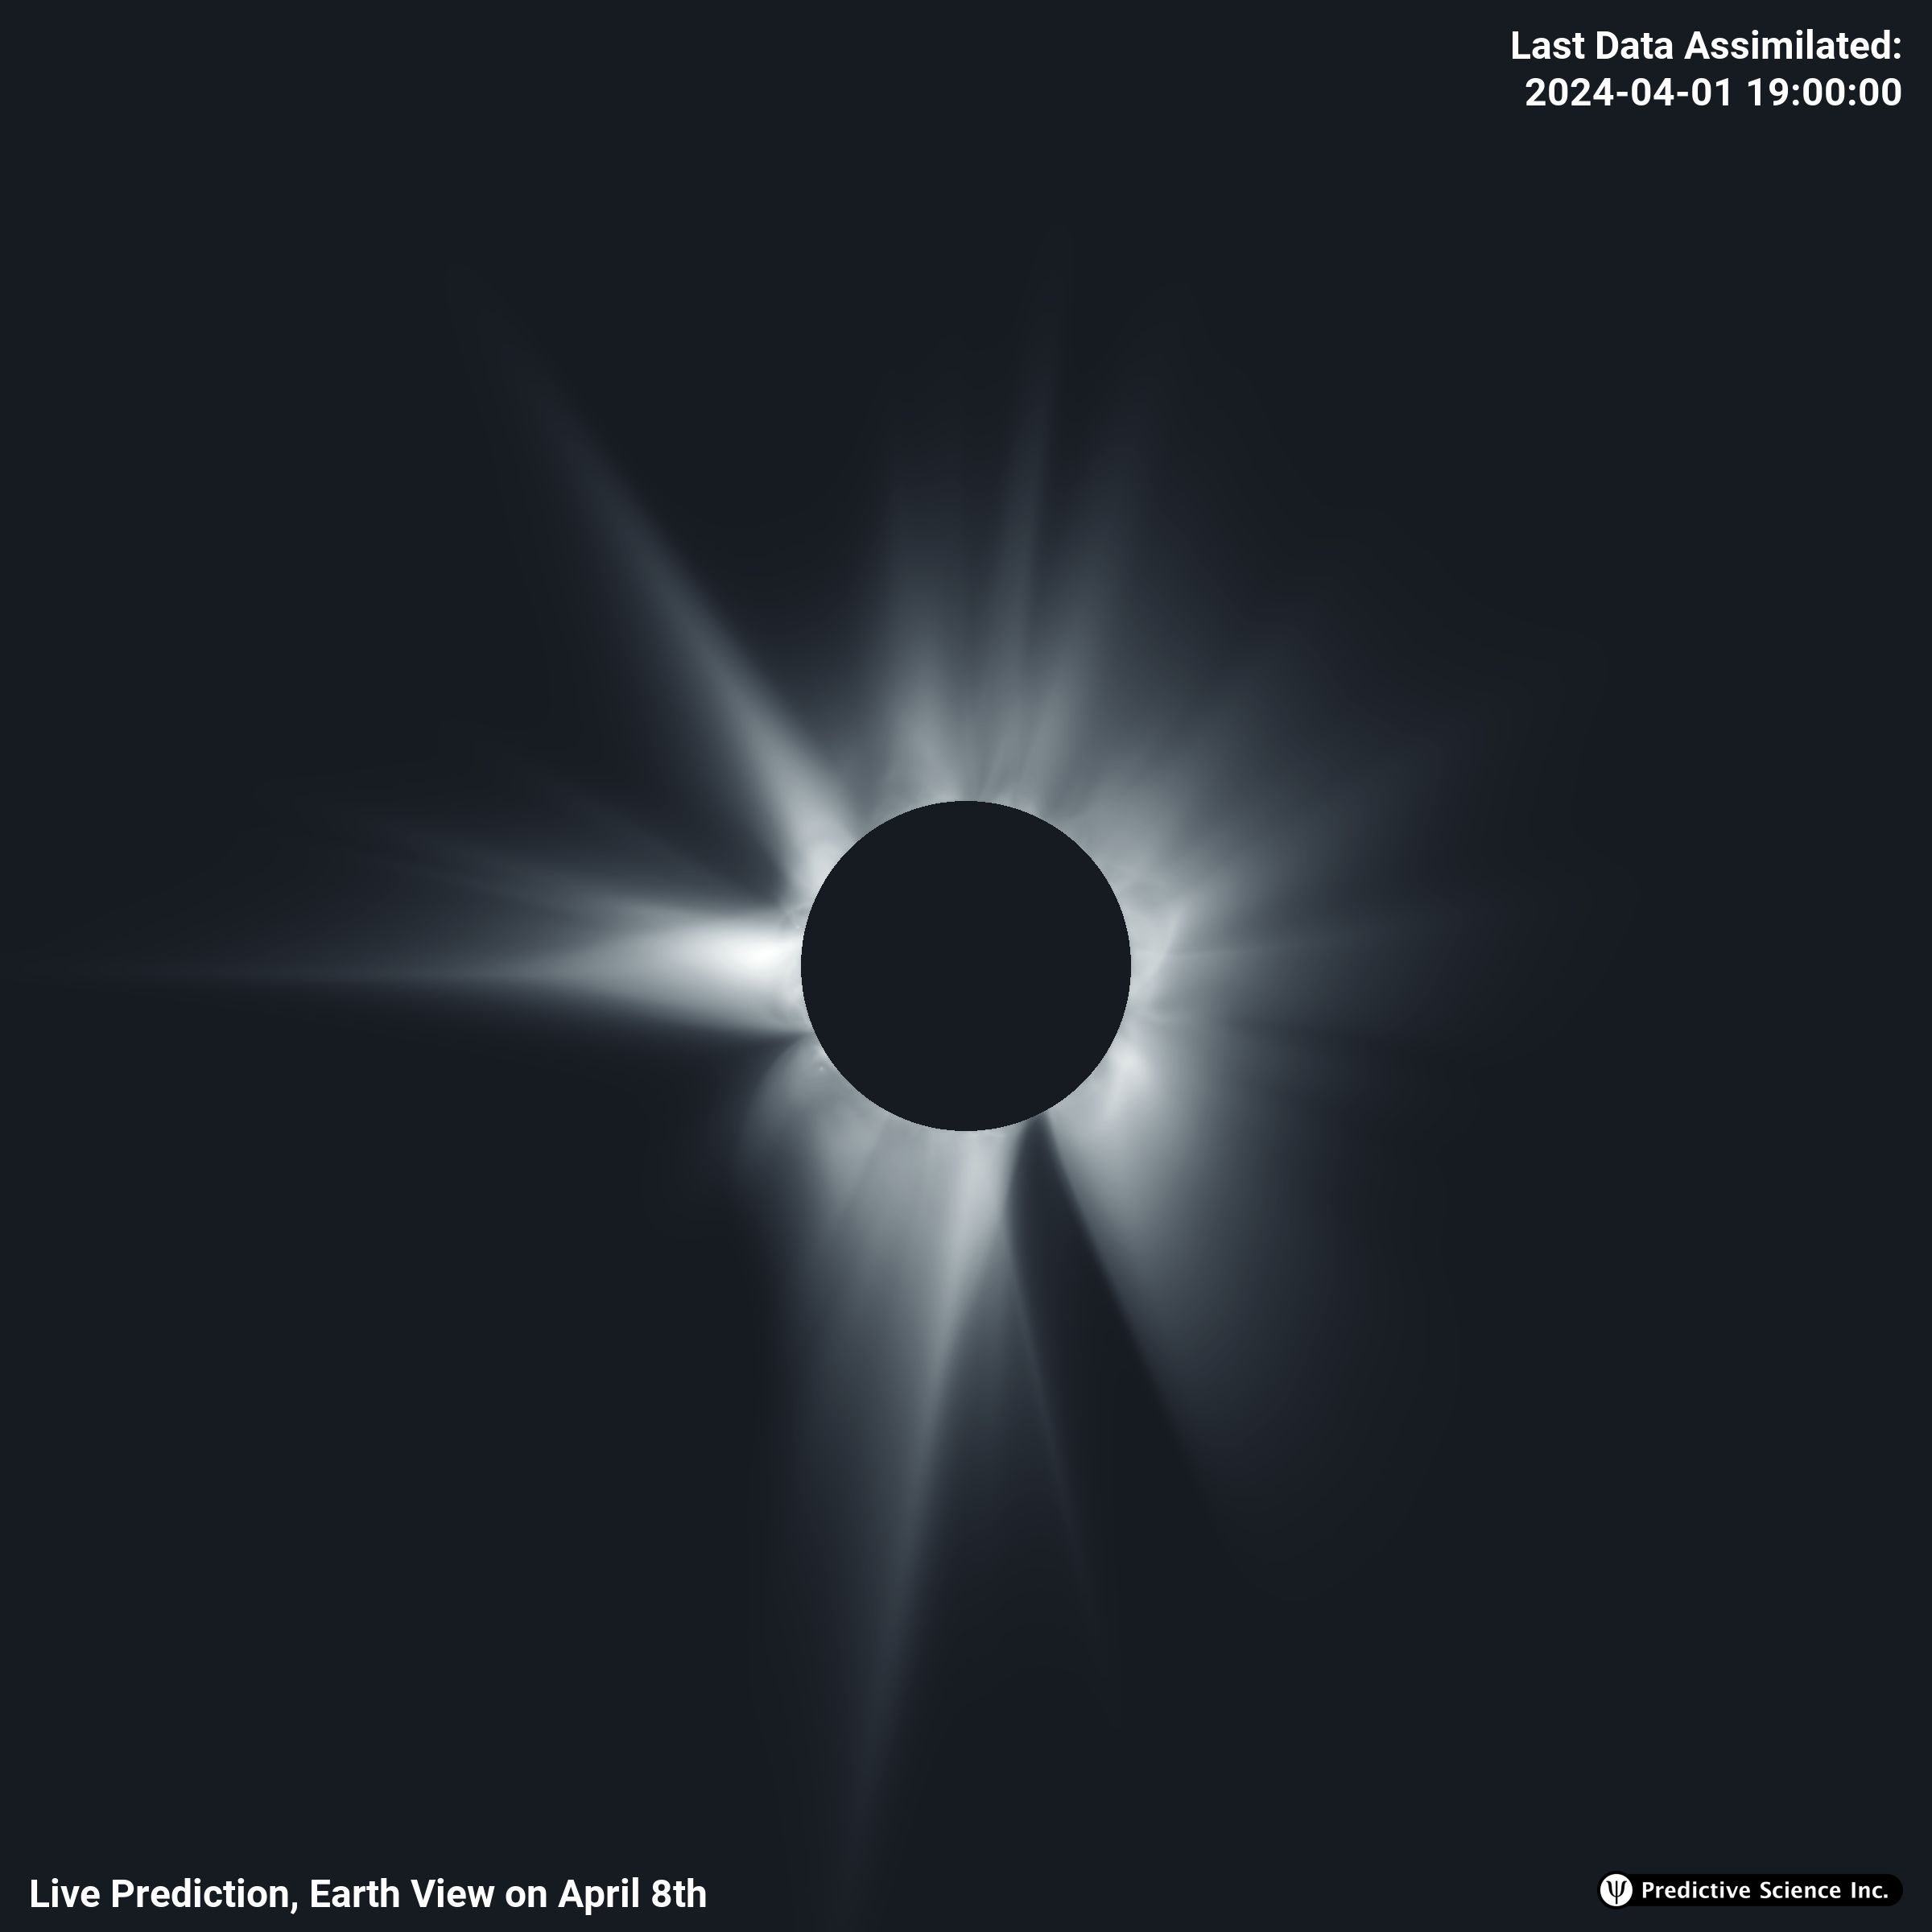 A model showing the evolution of the solar corona prediction for April 8, 2024. It shows the solar corona as white light with defined structure encircling a black disk. The structured light ripples and changes throughout the animation, which represents coronal predictions.